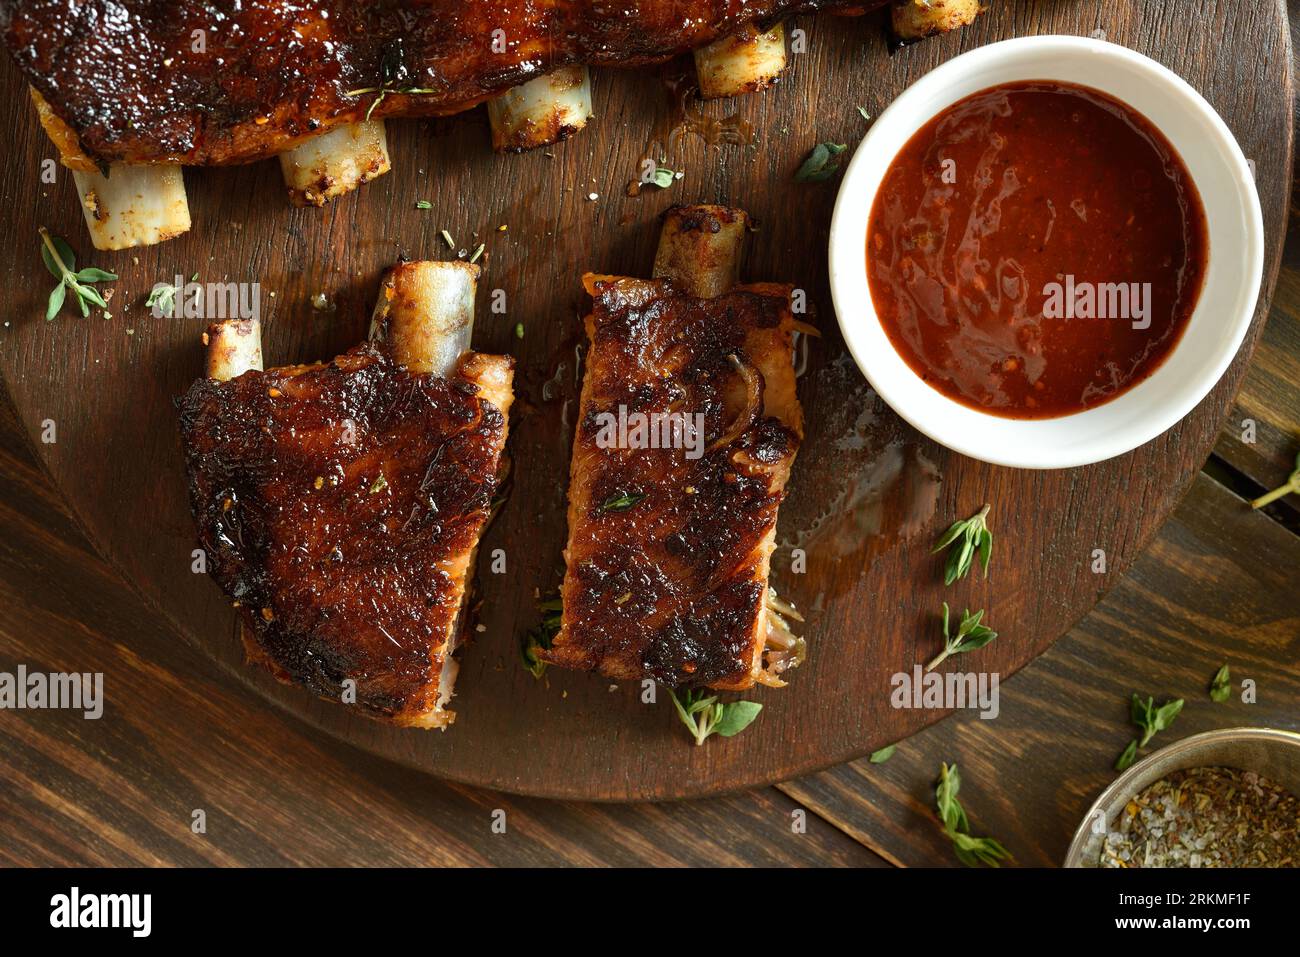 Barbecue pork ribs with tomato sauce on cutting board over wooden background. Top view, flat lay Stock Photo